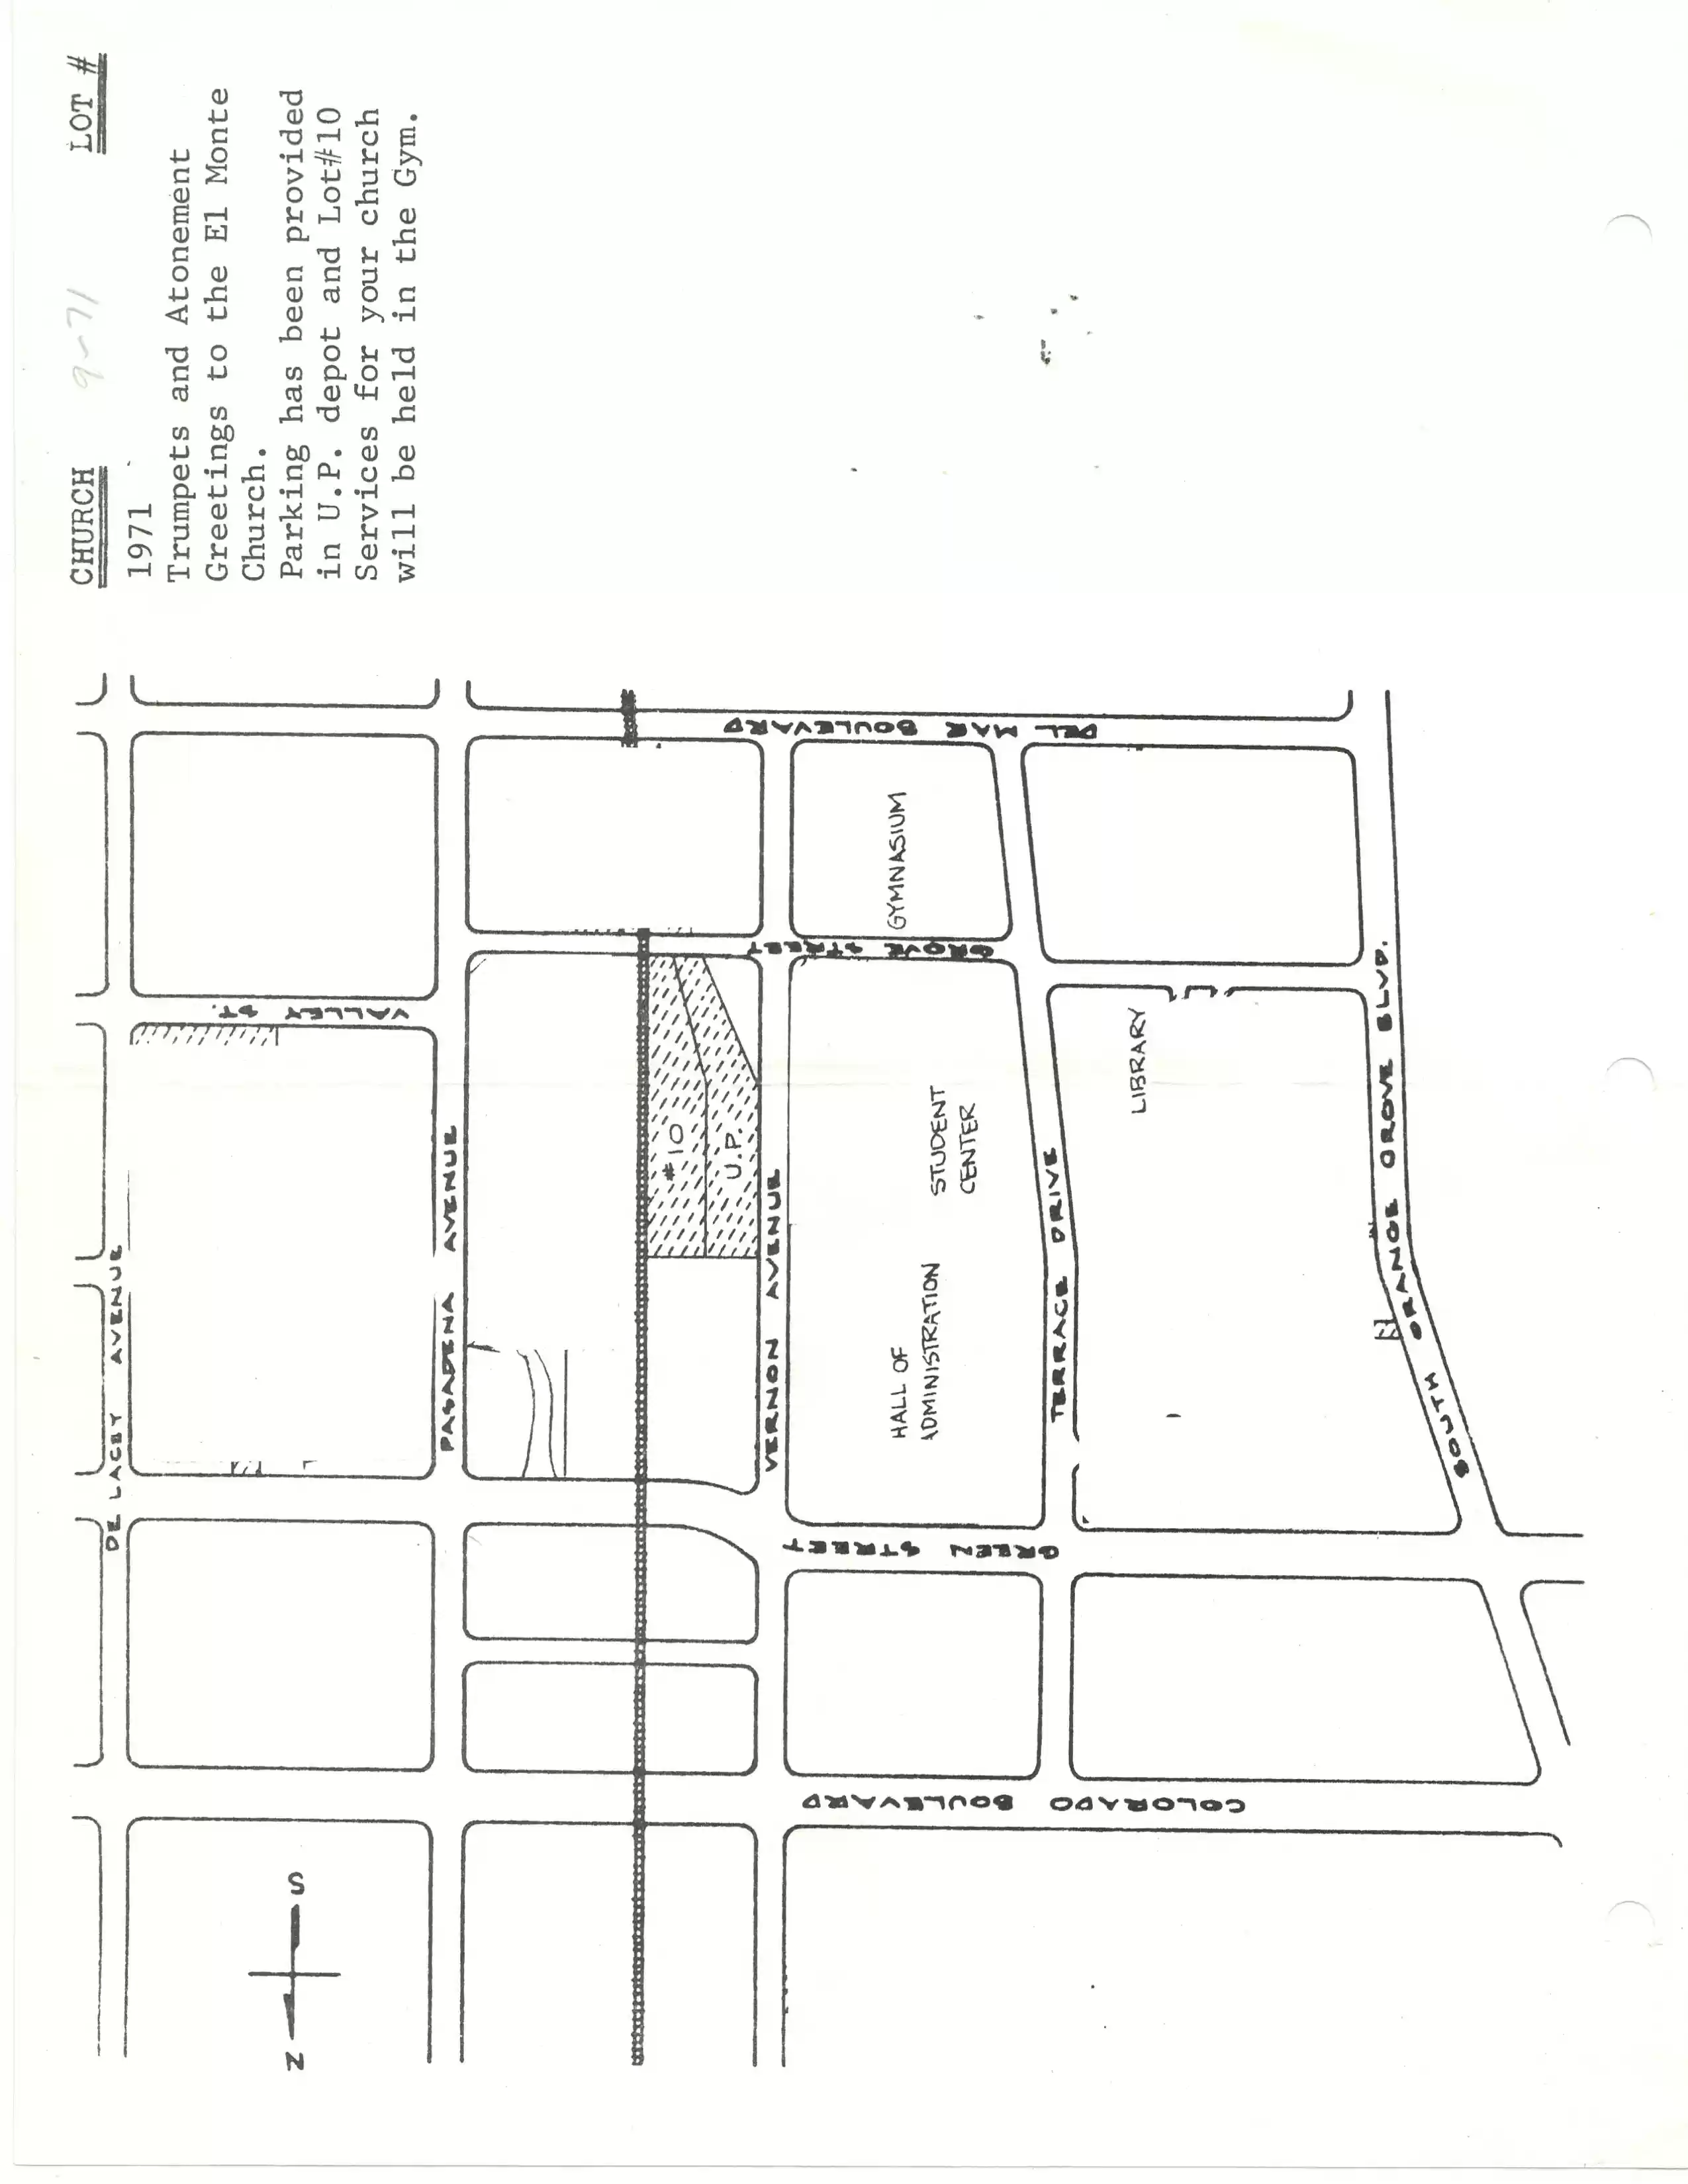 El Monte church parking map at AC for Trumpets & Atonement, 9-1971